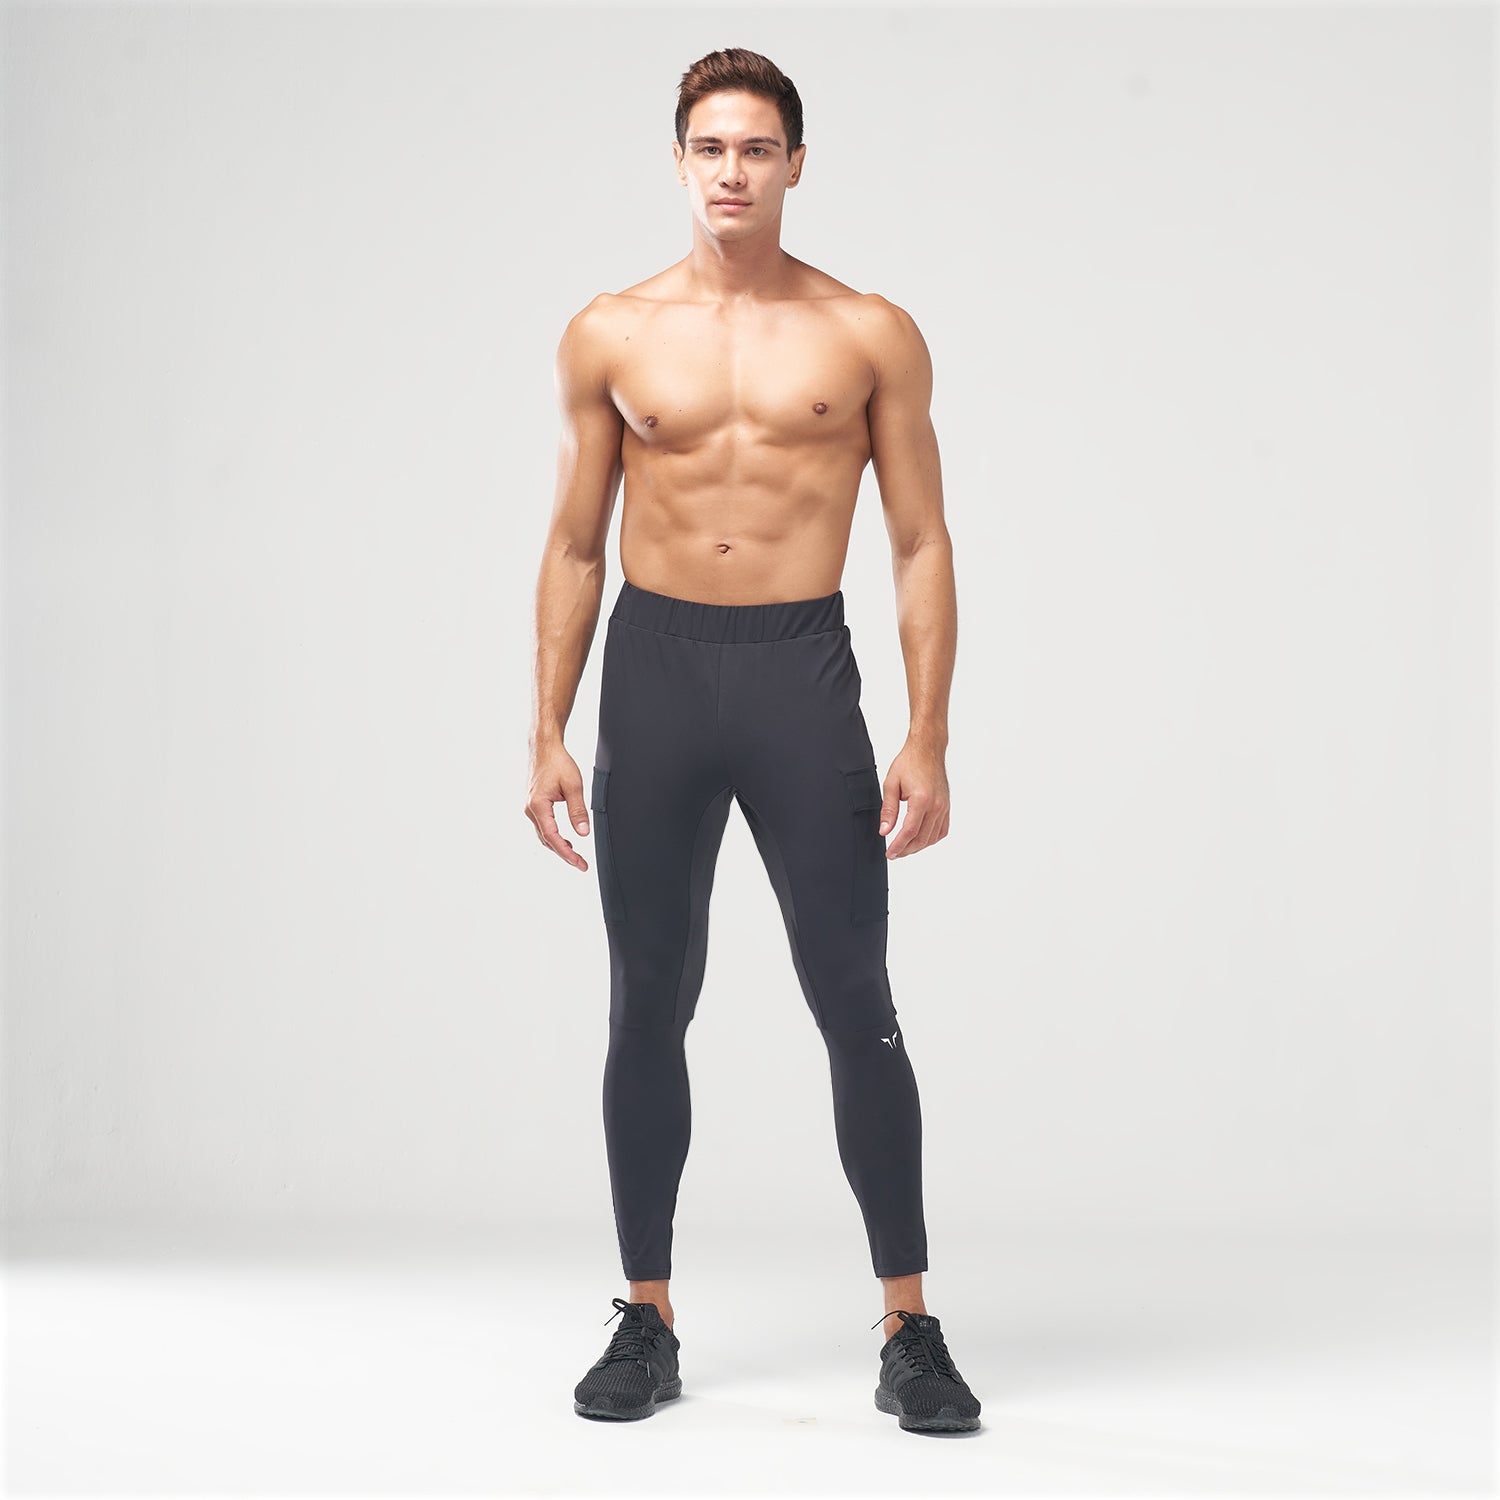 squatwolf-gym-wear-code-cargo-running-tights-black-workout-tights-for-men